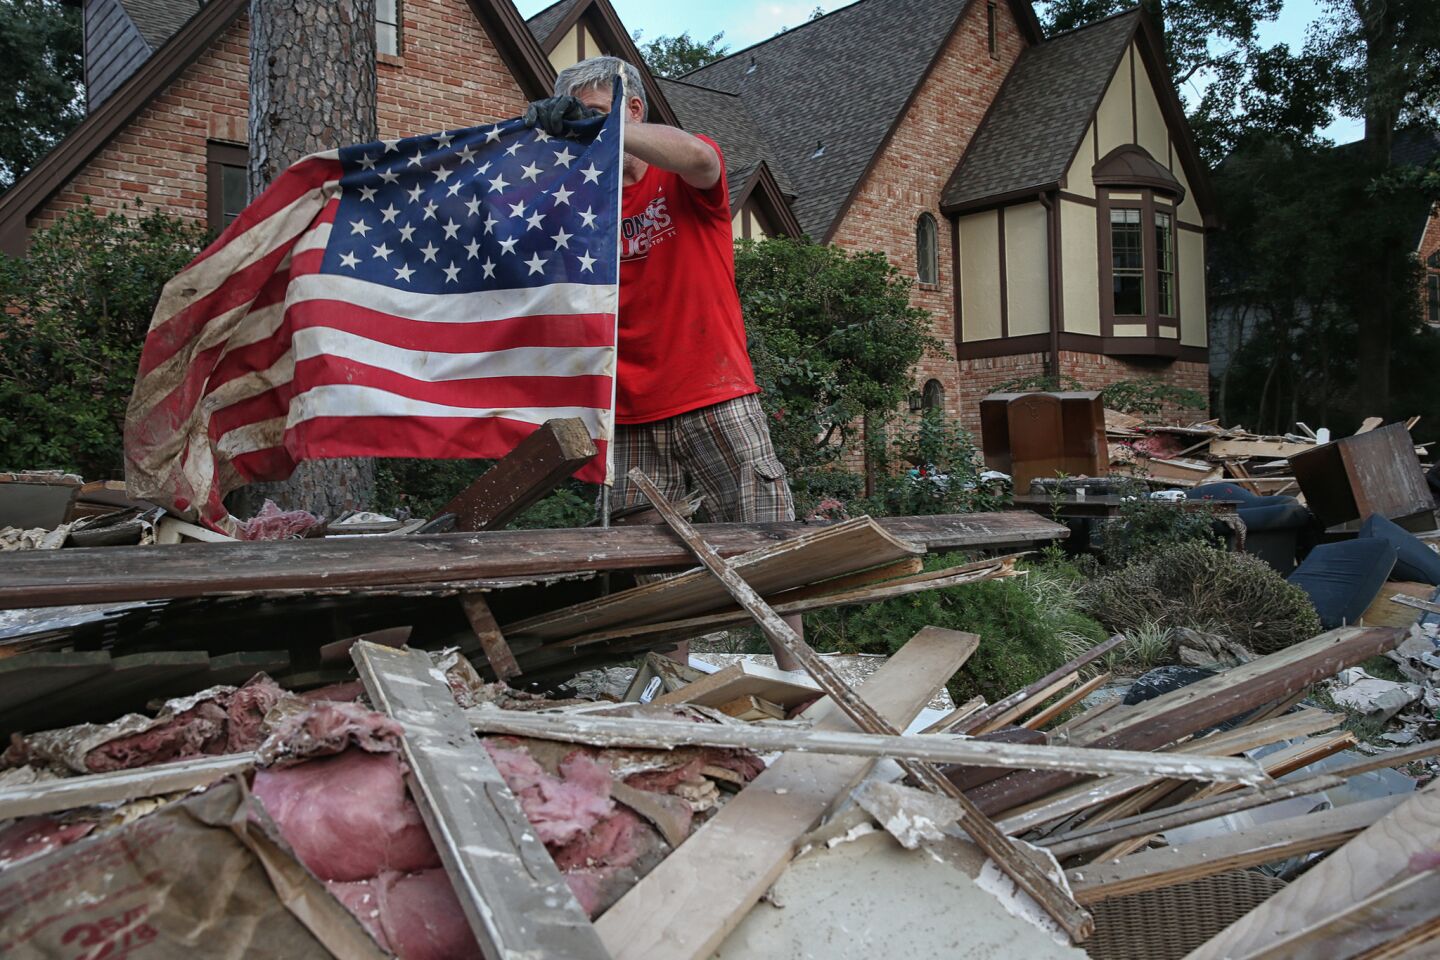 University of Houston law professor Johnny Buckles props up an American flag on the debris pile from his flood-damaged home in the Kingwood area of north Houston.